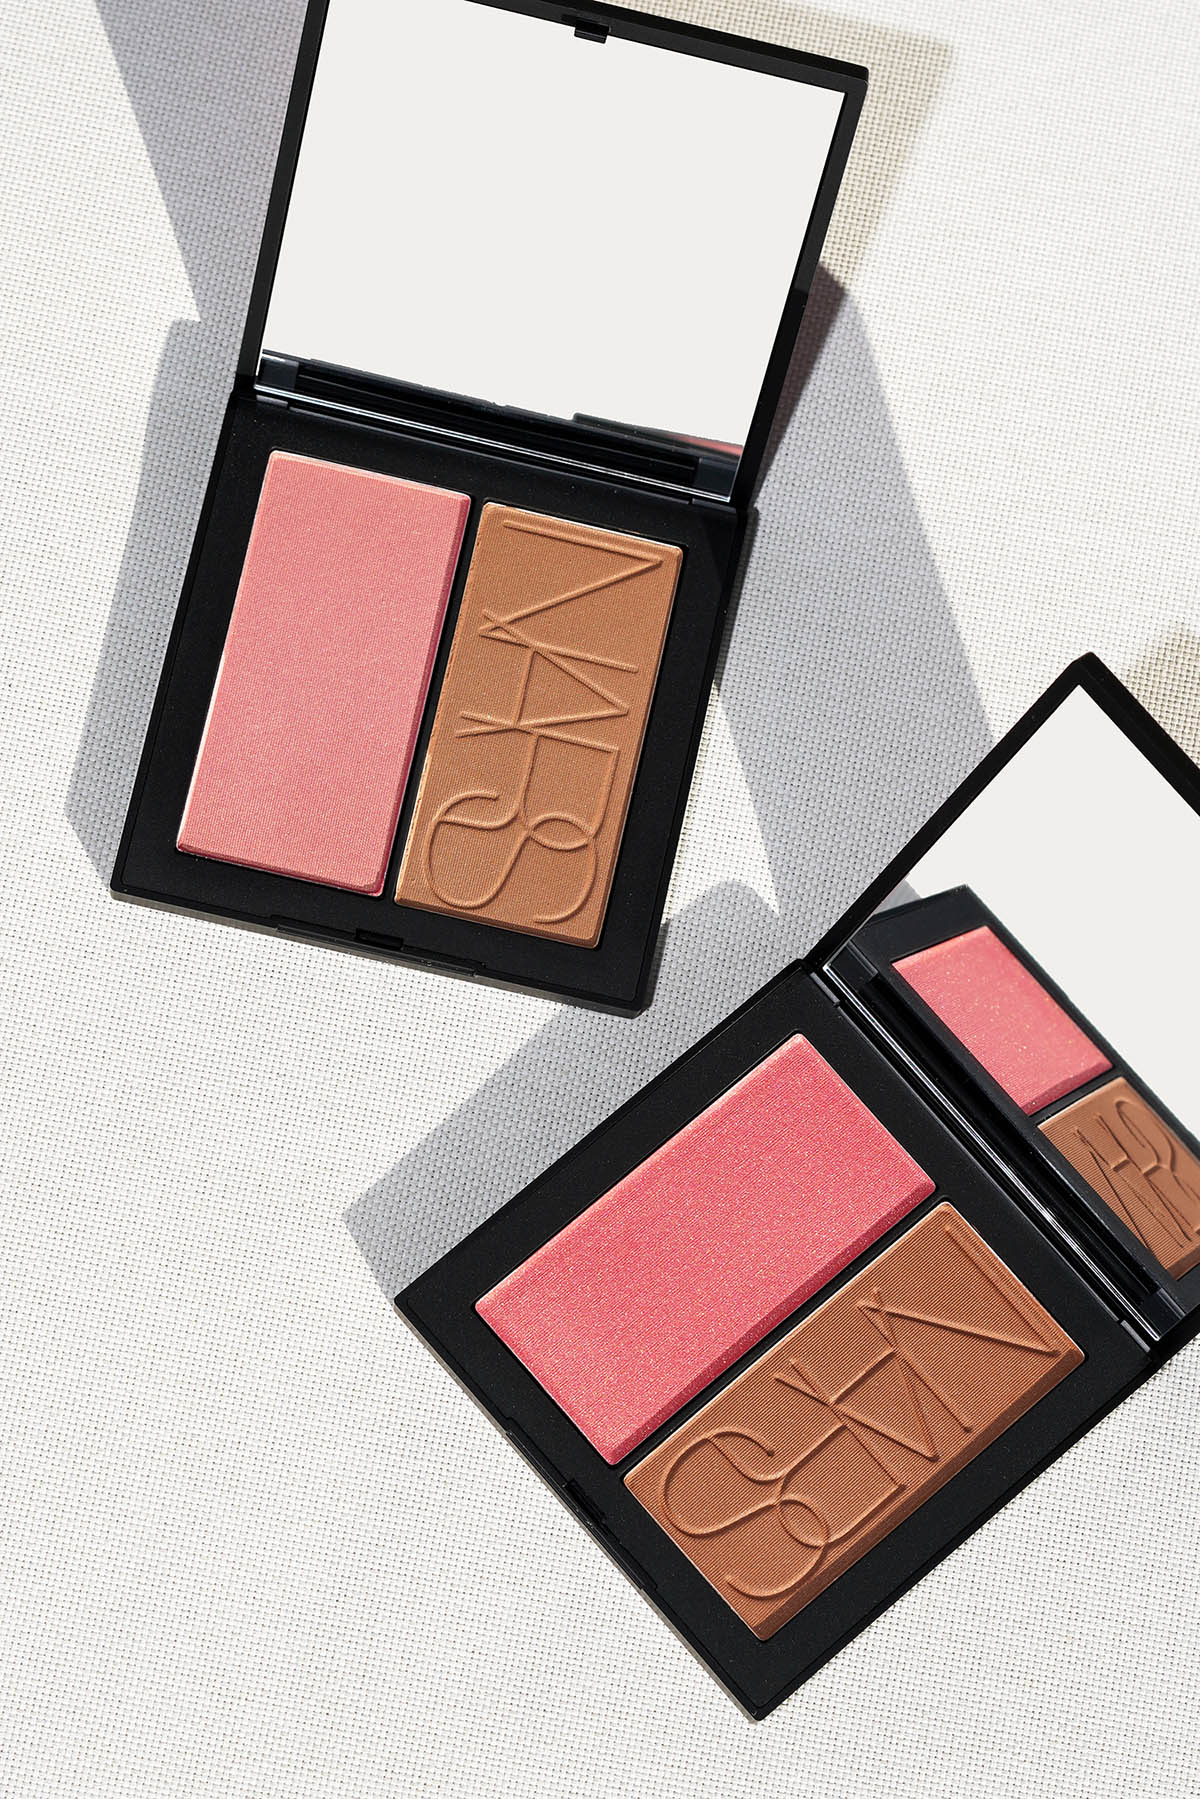 NARS Summer Unrated Blush Bronzer Duos